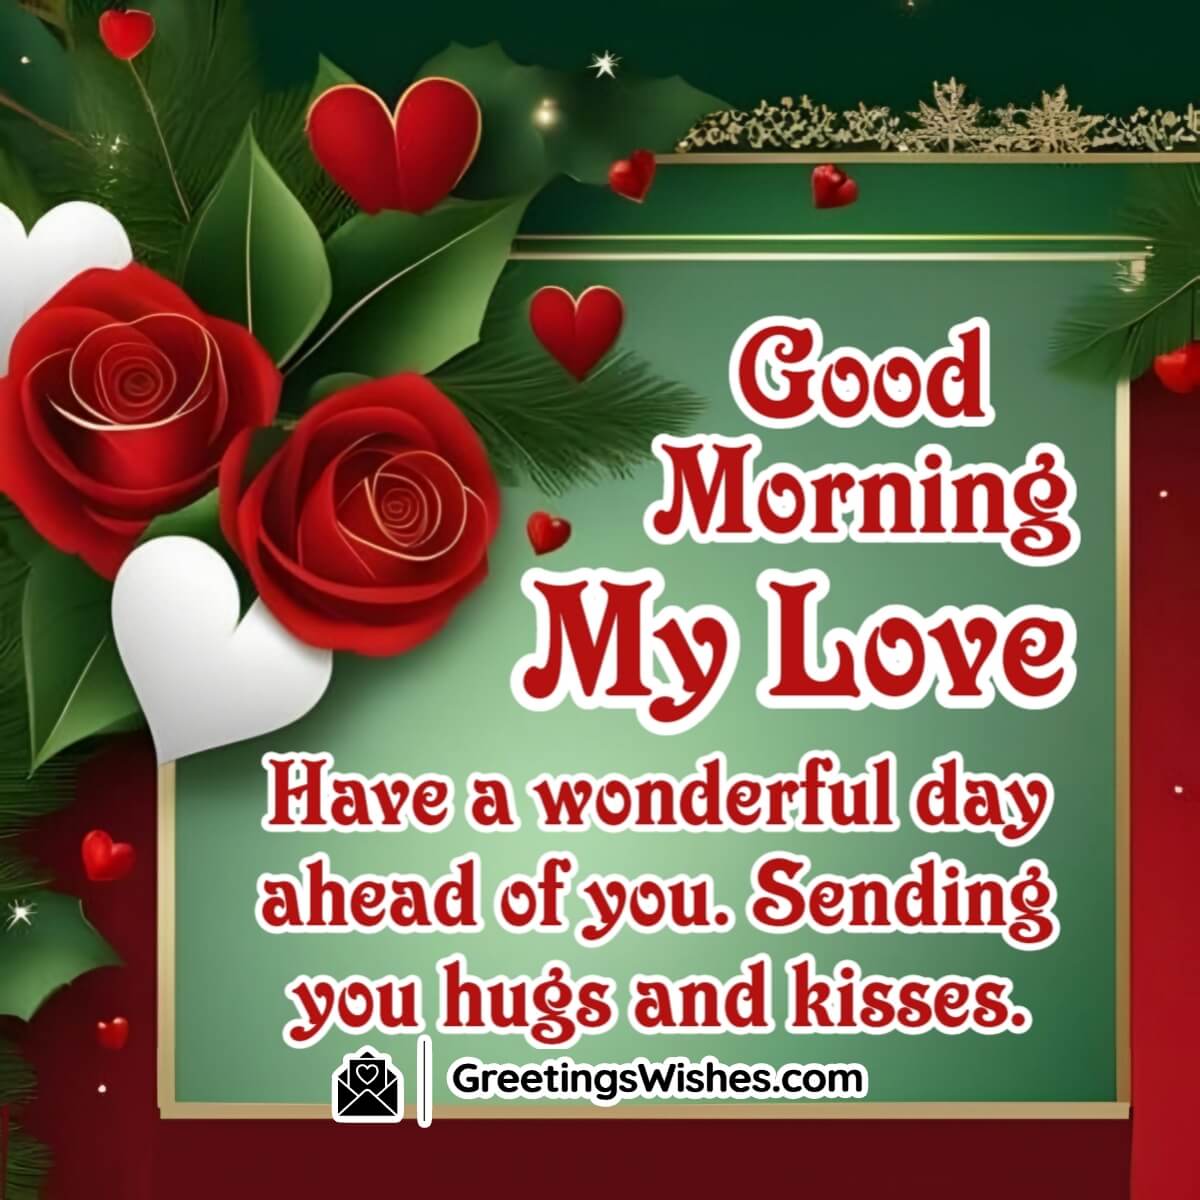 Good Morning Love Messages and Wishes